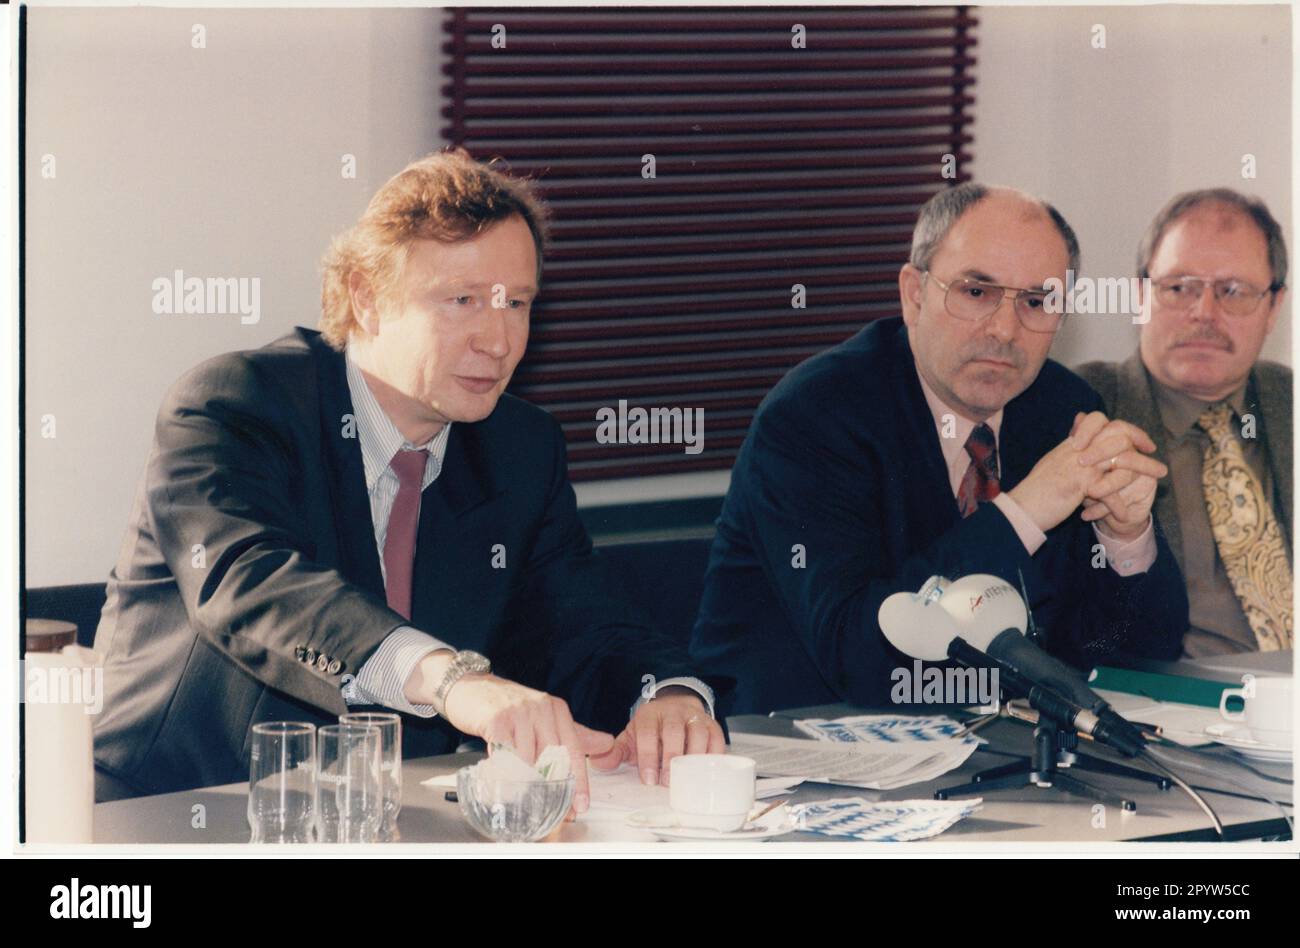 Commissioner for the Protection of the Constitution Hans-Jürgen Förster (l.) and Interior Minister Alwin Ziel. Office for the Protection of the Constitution. Internal Security. State government. Photo: MAZ/Michael Hübner, December 1996 [automated translation] Stock Photo